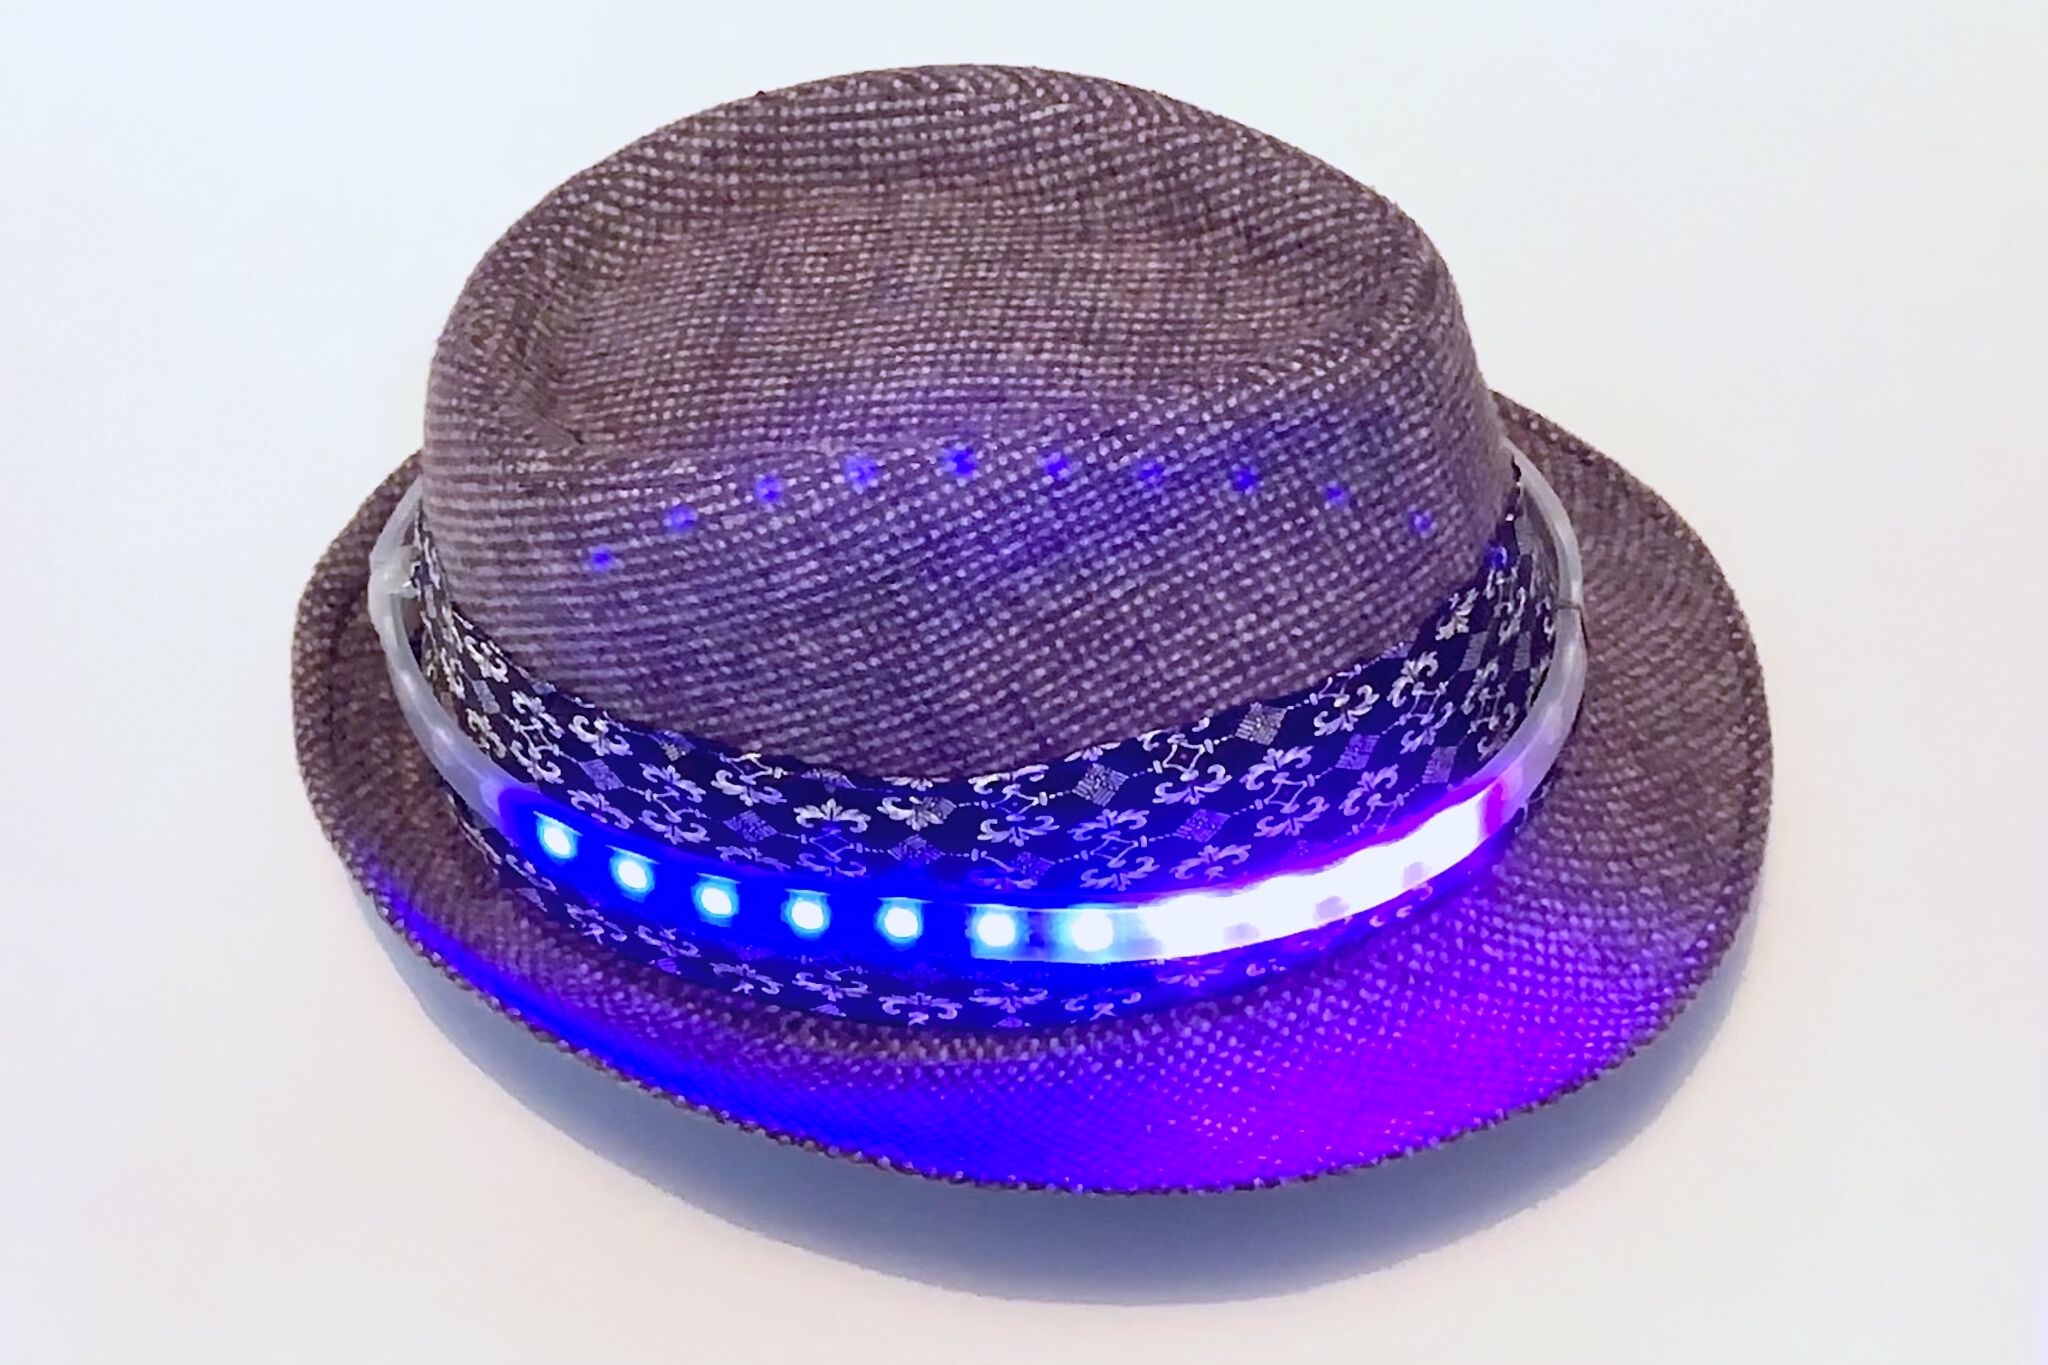  A hat, bejewelled with 38 RGB LEDs